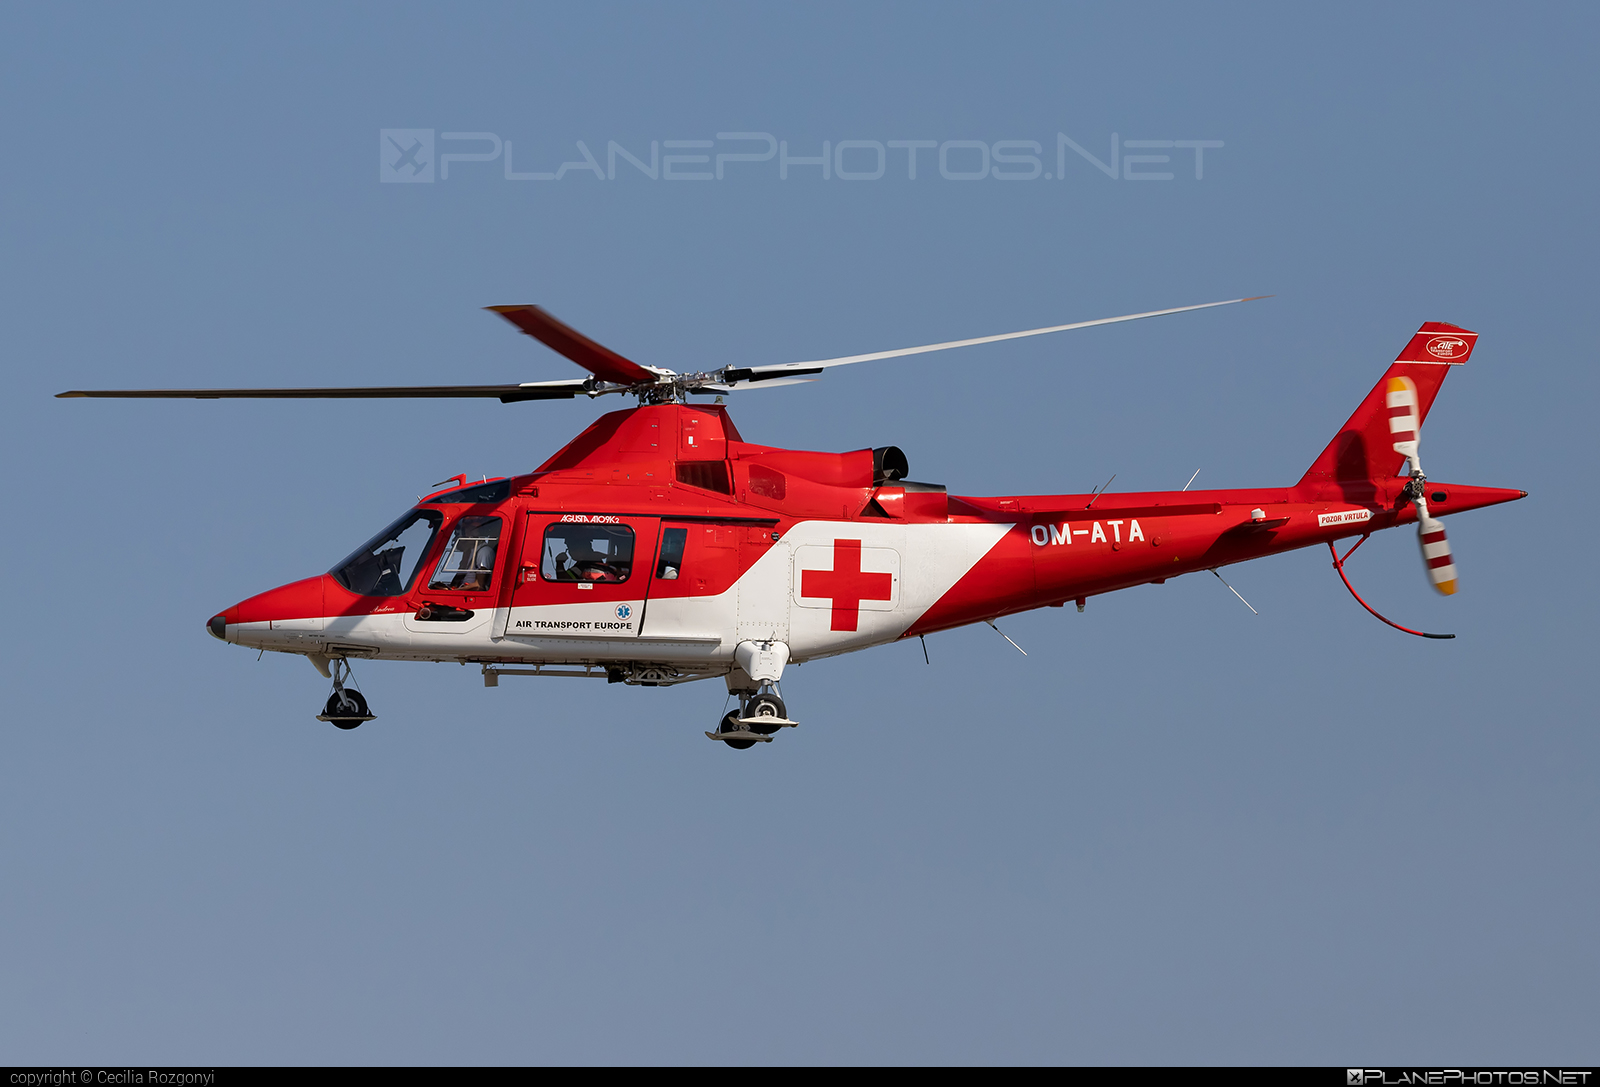 Agusta A109K2 - OM-ATA operated by Air Transport Europe #a109 #a109k2 #agusta #agusta109 #agustaa109 #agustaa109k2 #airtransporteurope